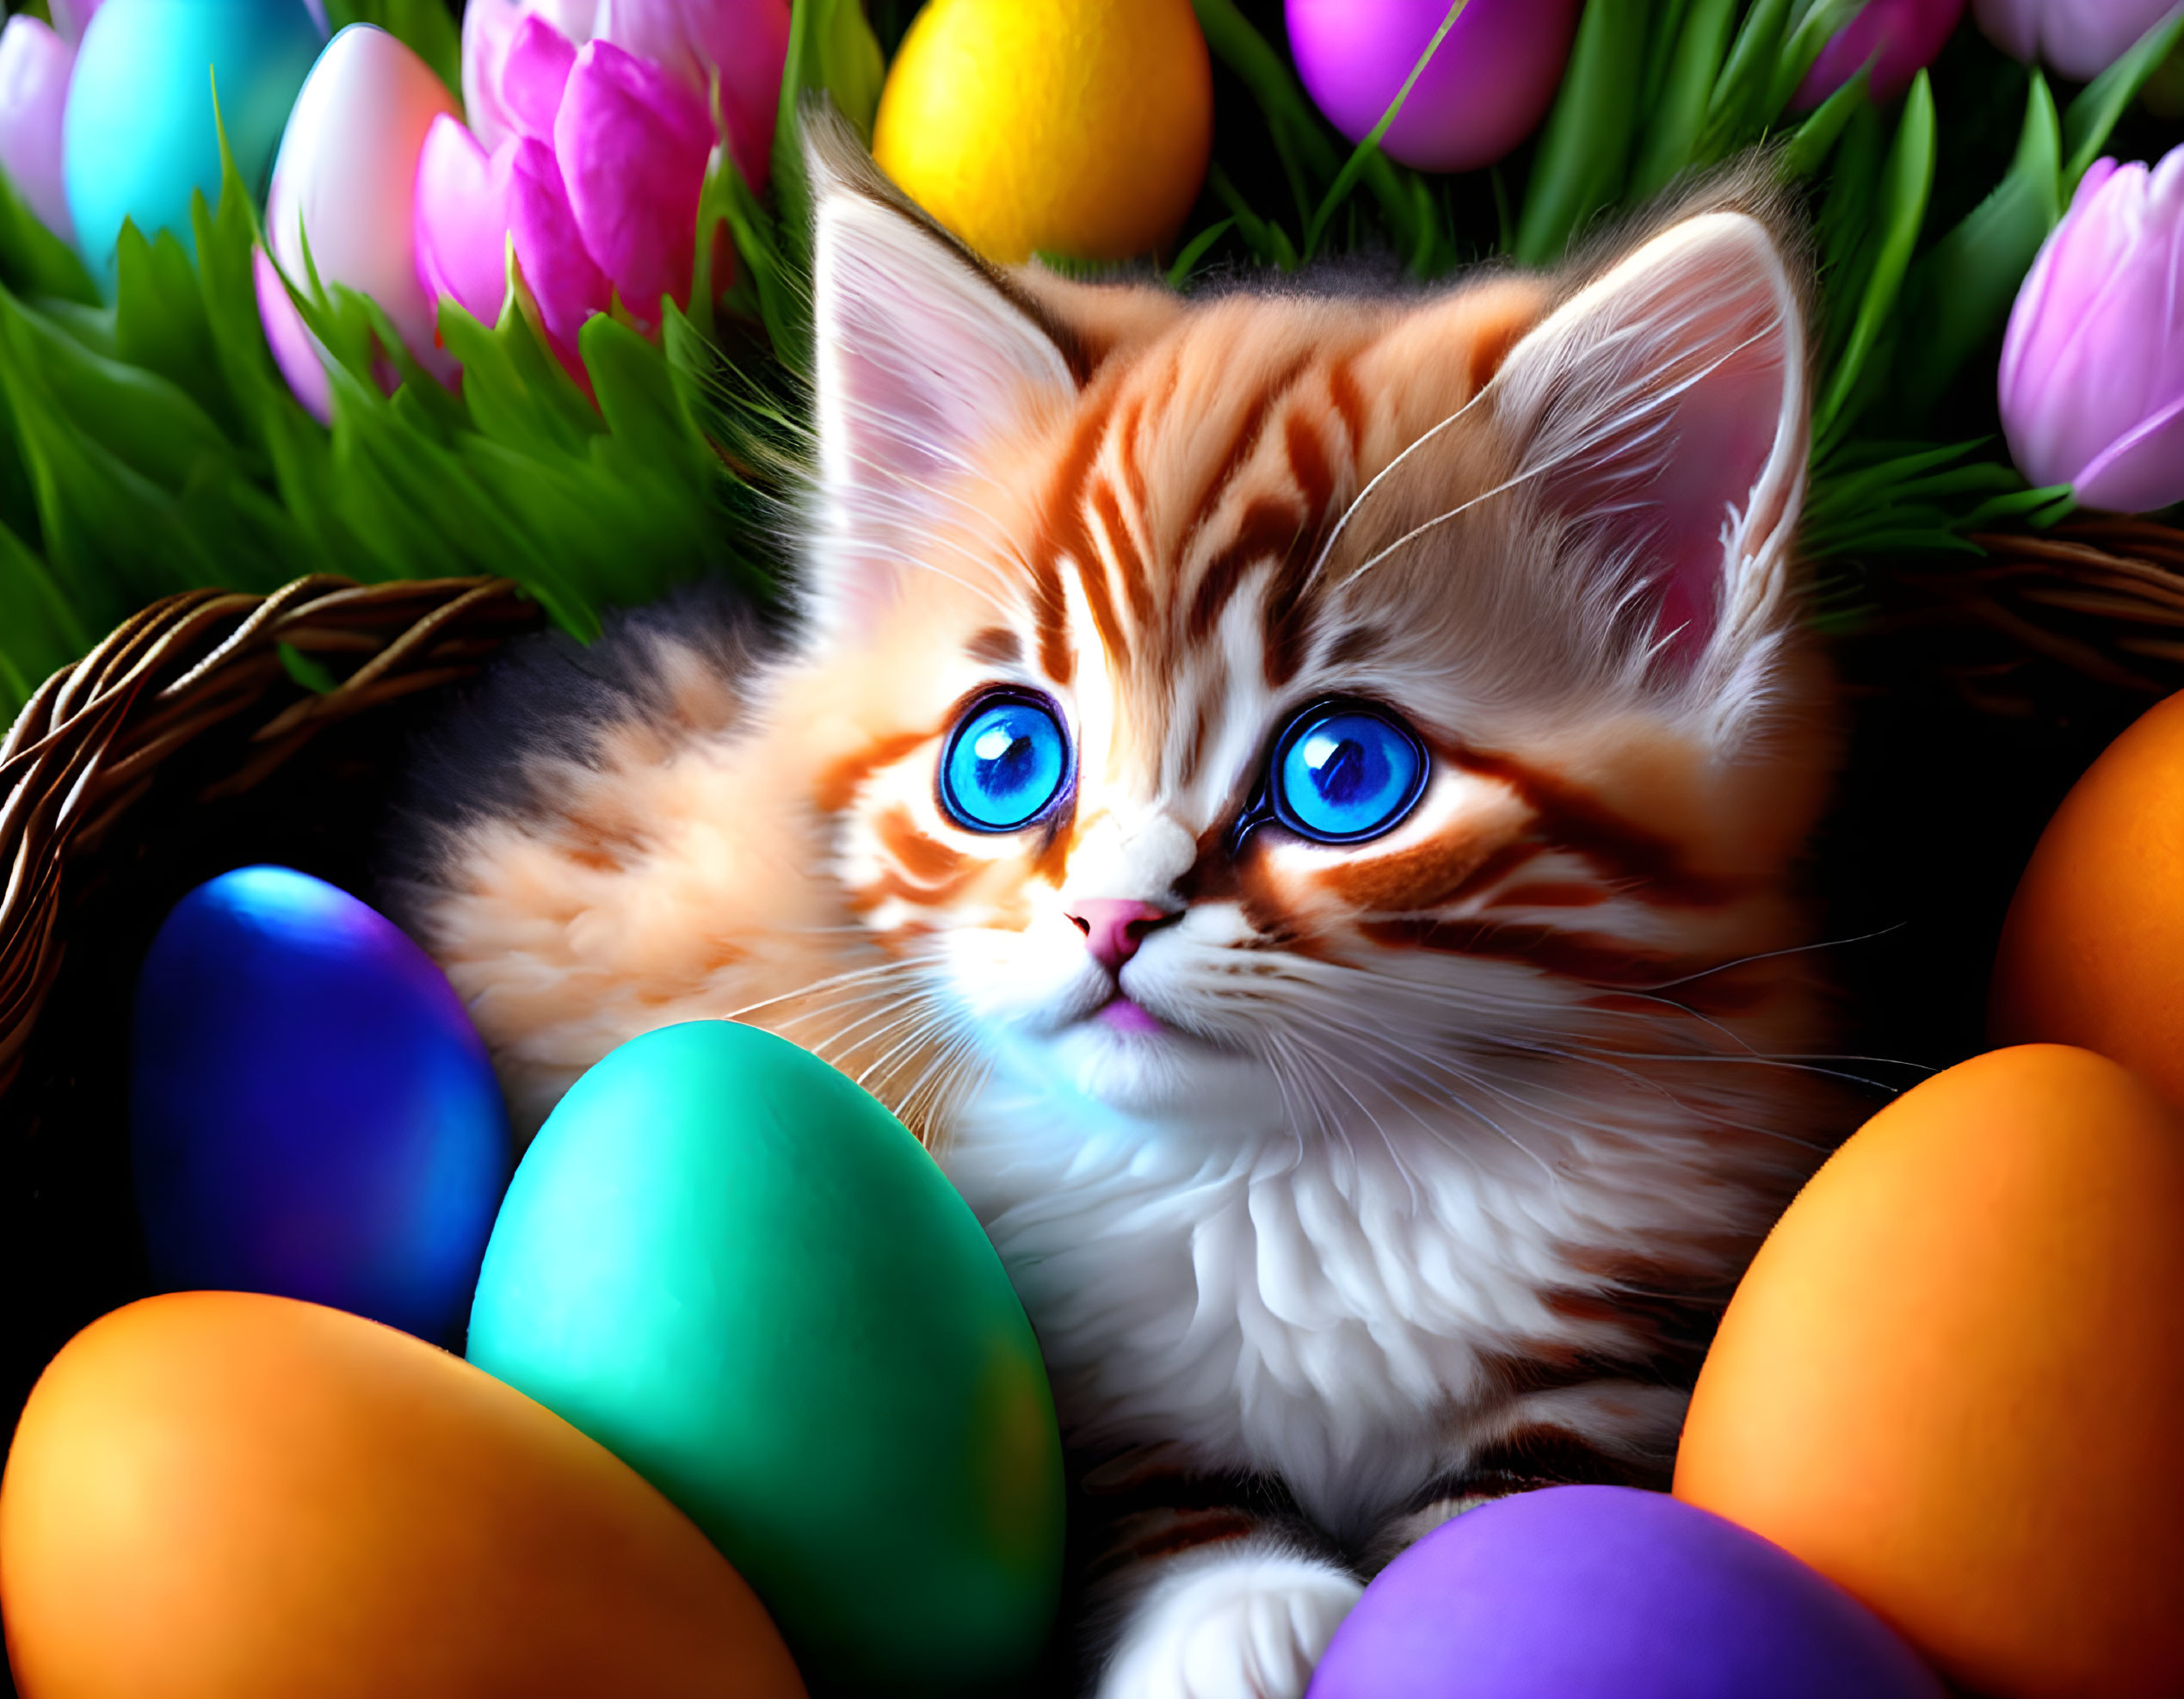 Adorable kitten with blue eyes among Easter eggs and tulips